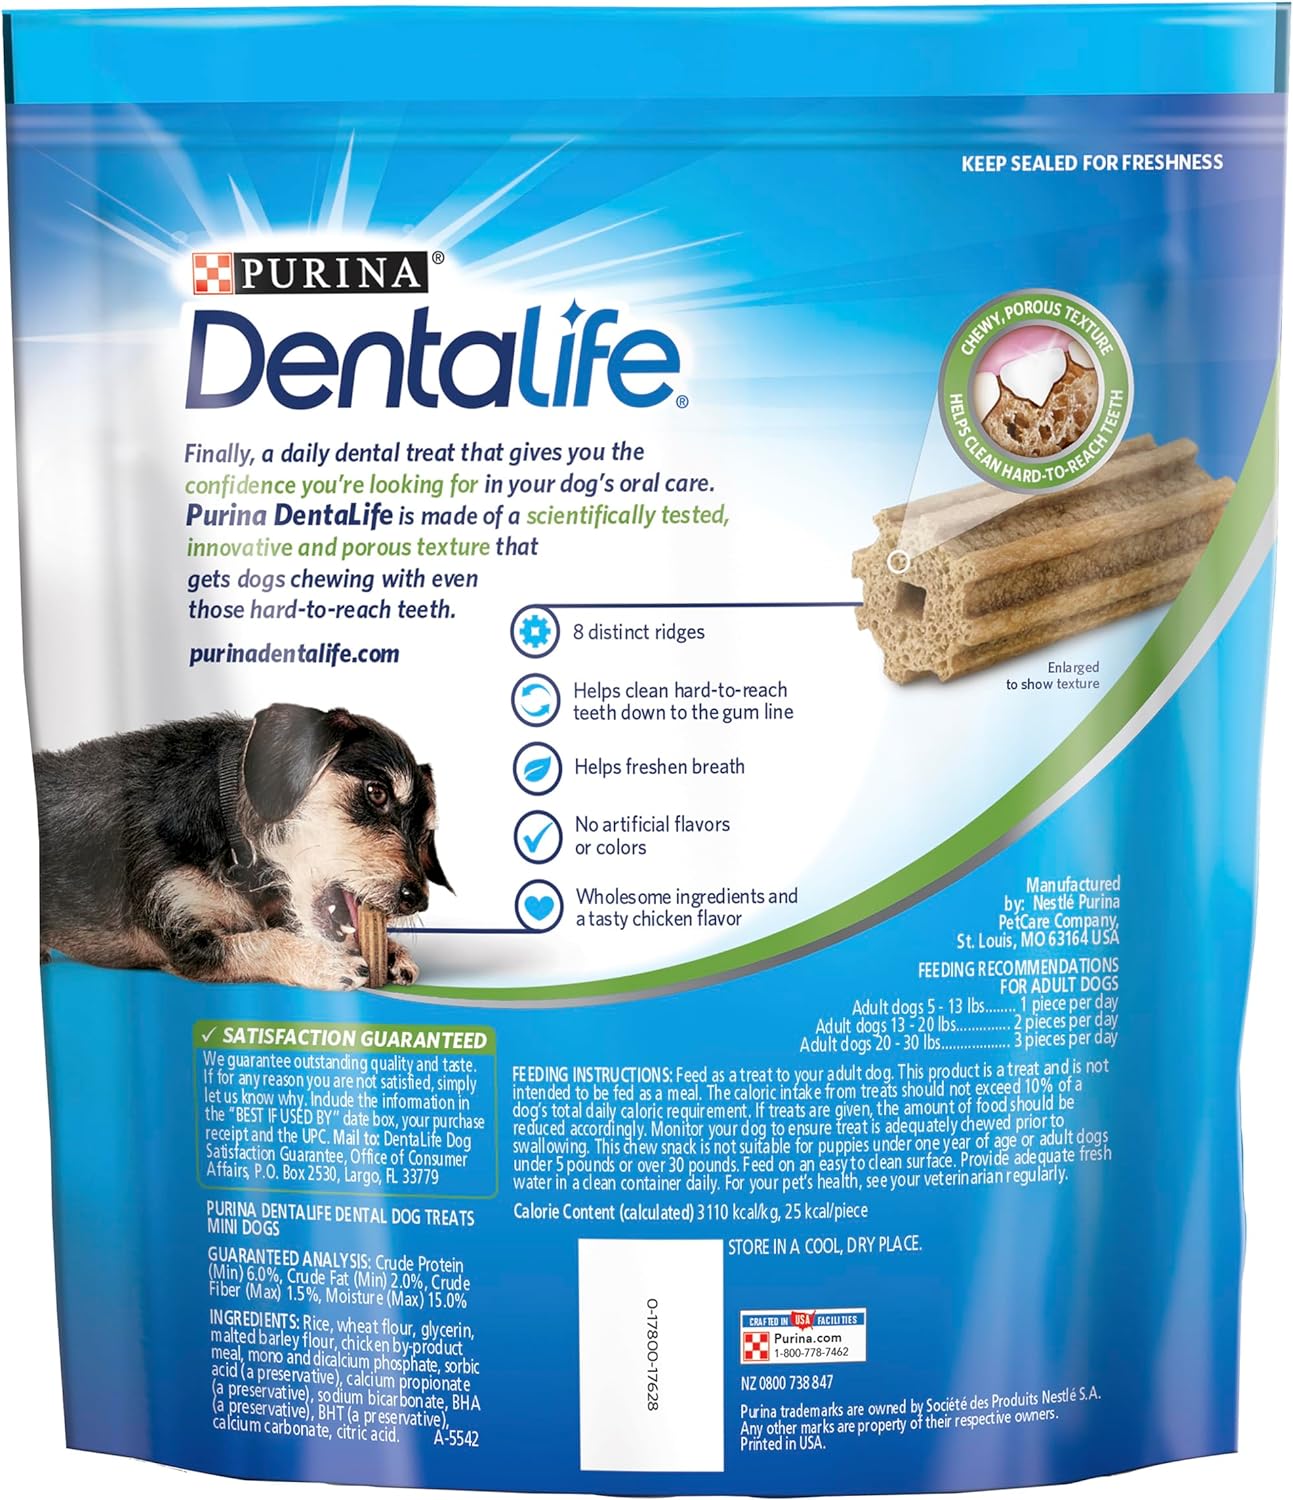 Uniites™ Dentalife DentaLife Made in USA Facilities Toy Breed Dog Dental Chews, Daily Mini - 58 ct. Pouch $9.91